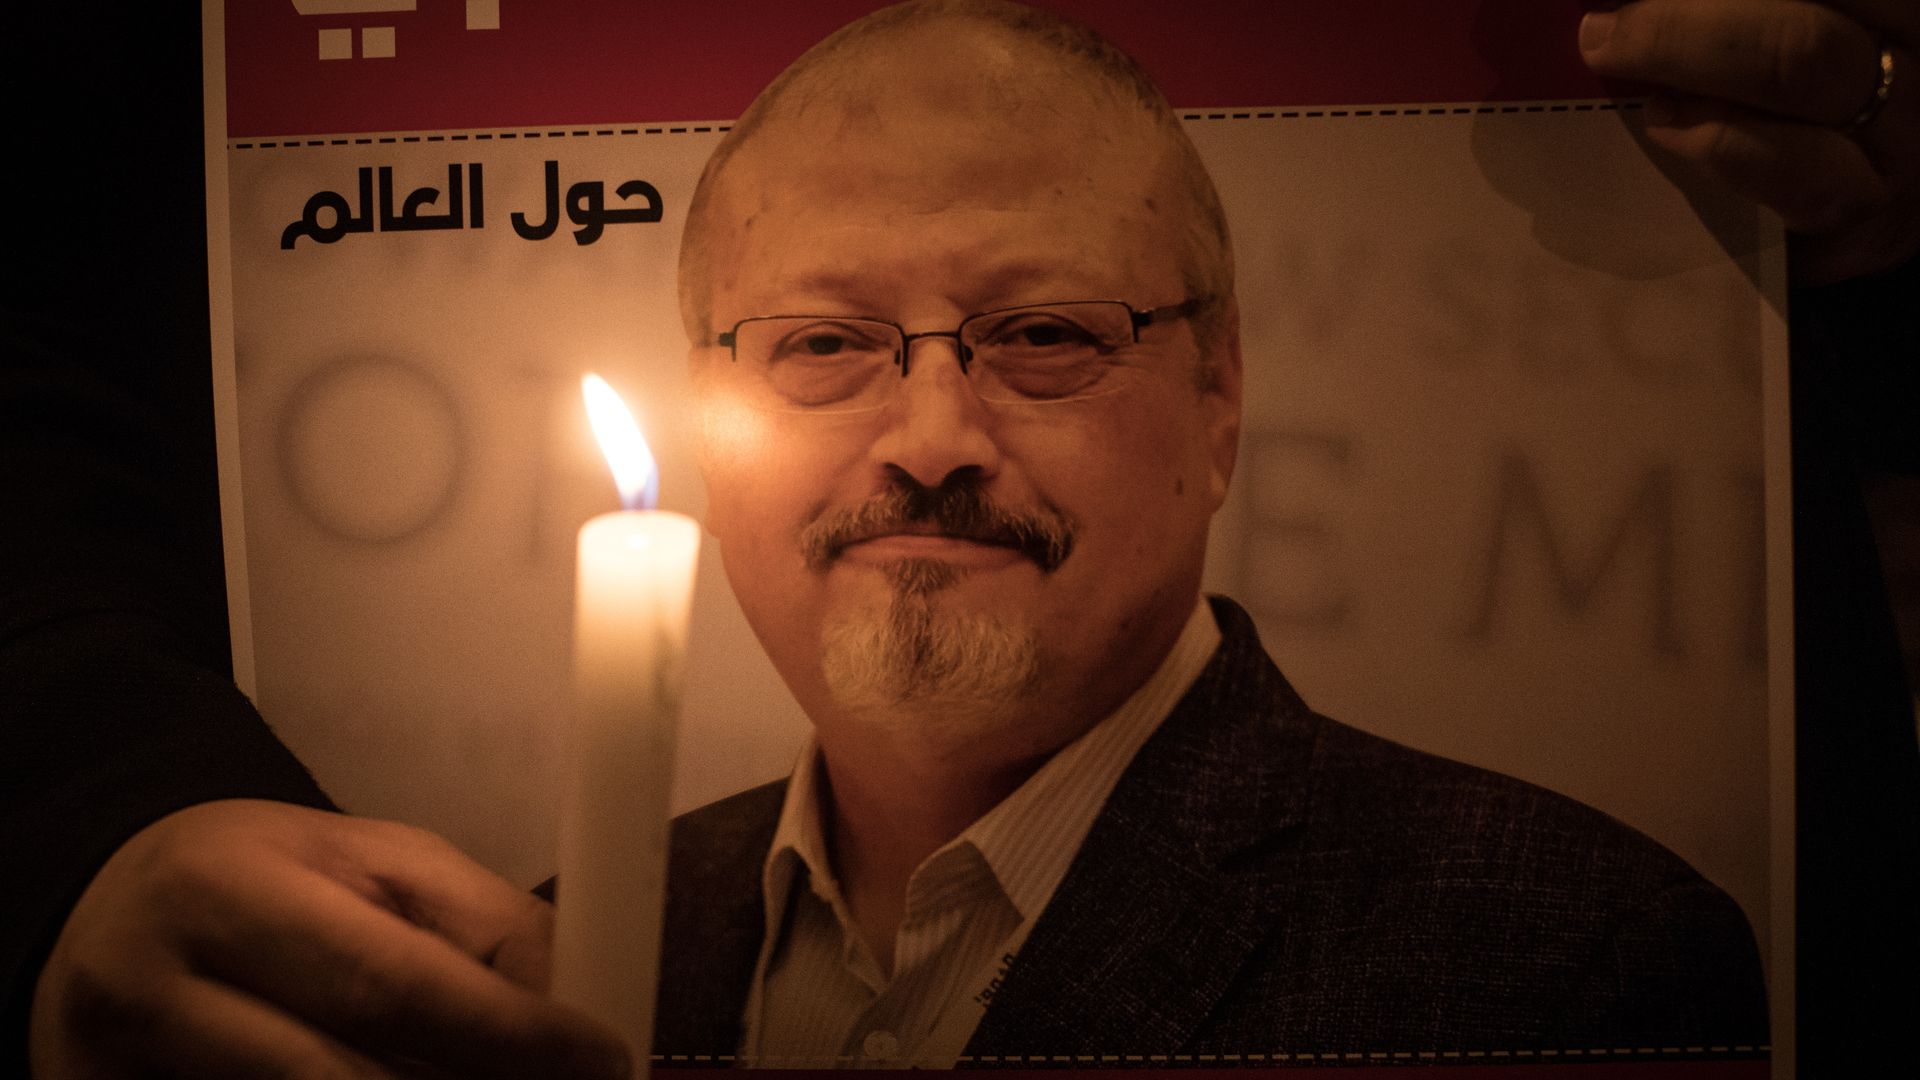 A person holding a picture of journalist Jamal Khashoggi during a vigil for him outside of the Saudi Arabia consulate in Istanbul, Turkey, in October 2018.